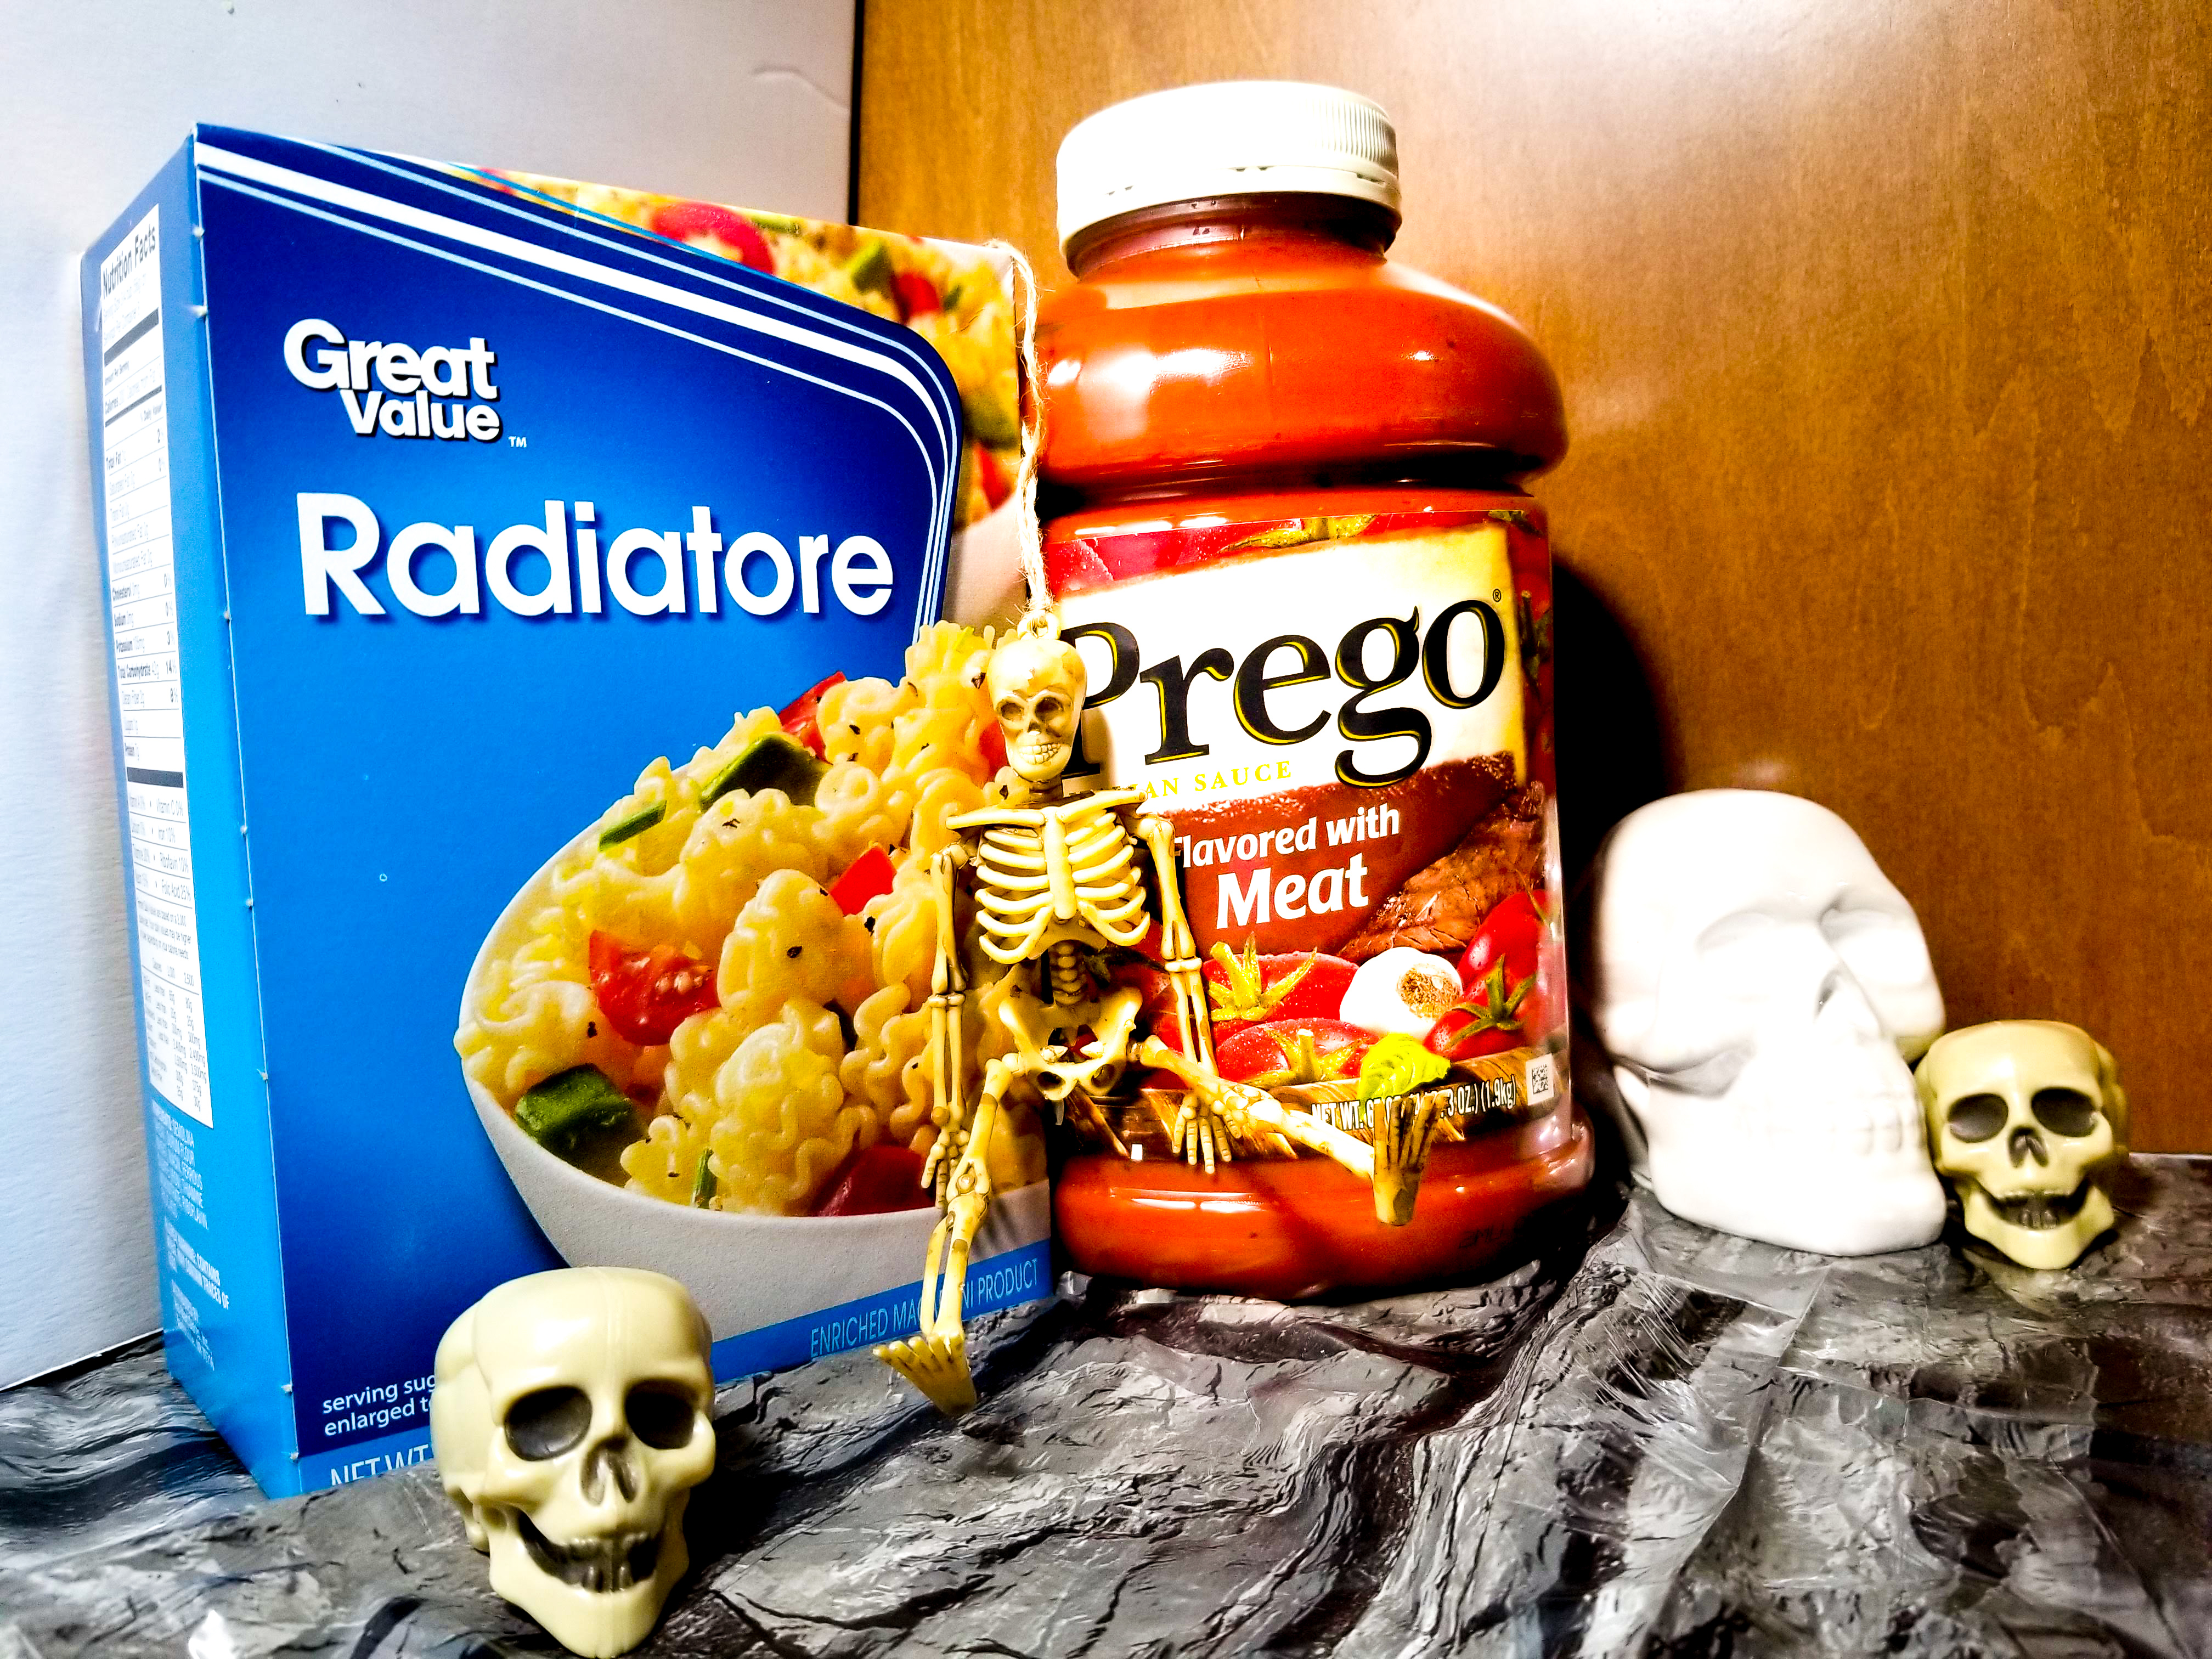 How to Make Creepy Brain Pasta! This is the easiest and fastest meal I have ever made; did I mention it was also the grossest? Stop by our site and read our post, you will see our recipe is dead on!